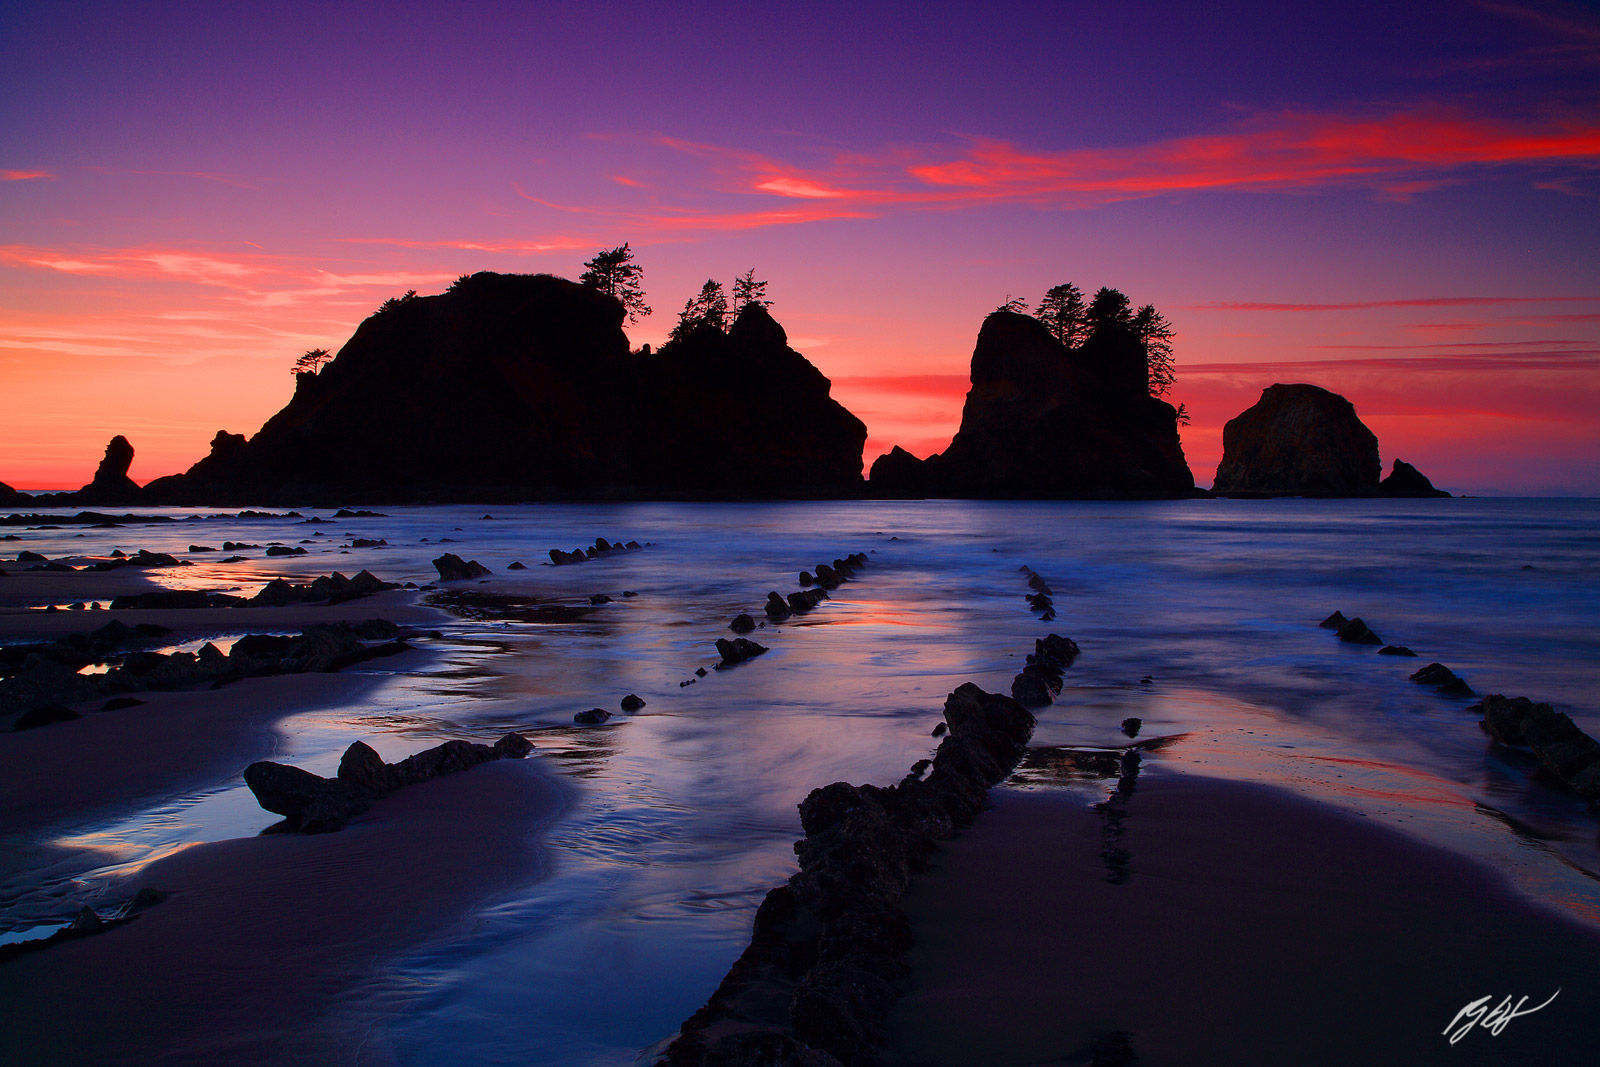 Sunset Alpenglow on Shi Shi Beach from Olympic National Park in Washington